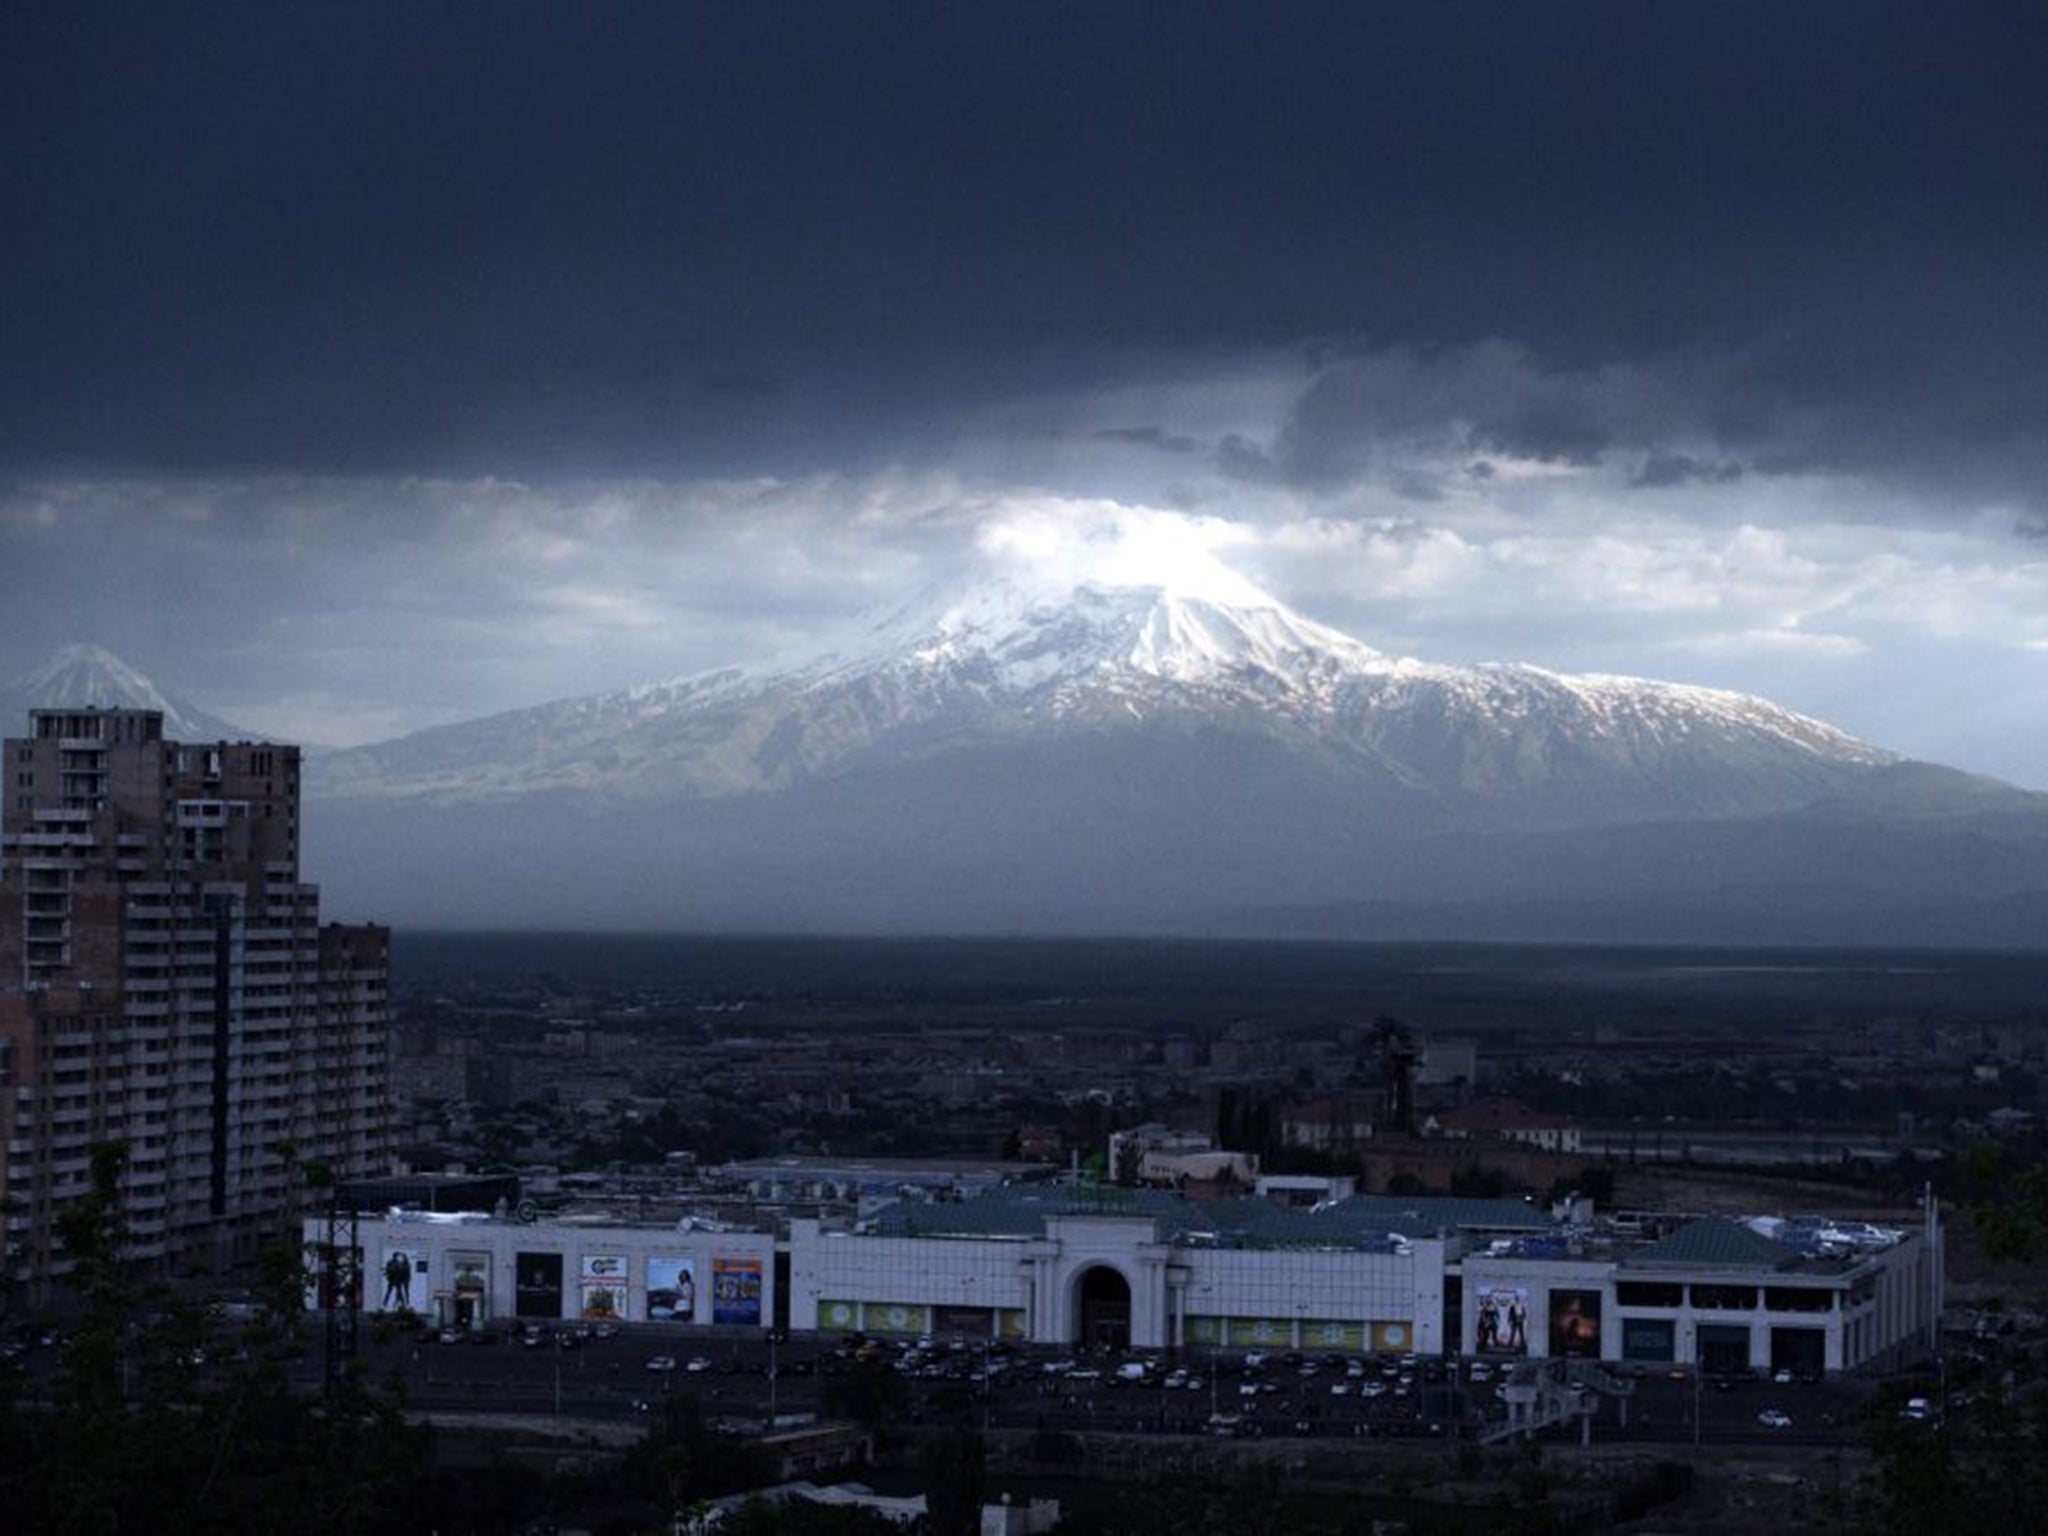 Mount Ararat as seen from the Armenian side – the mountain stands in Turkey but is revered by Armenians